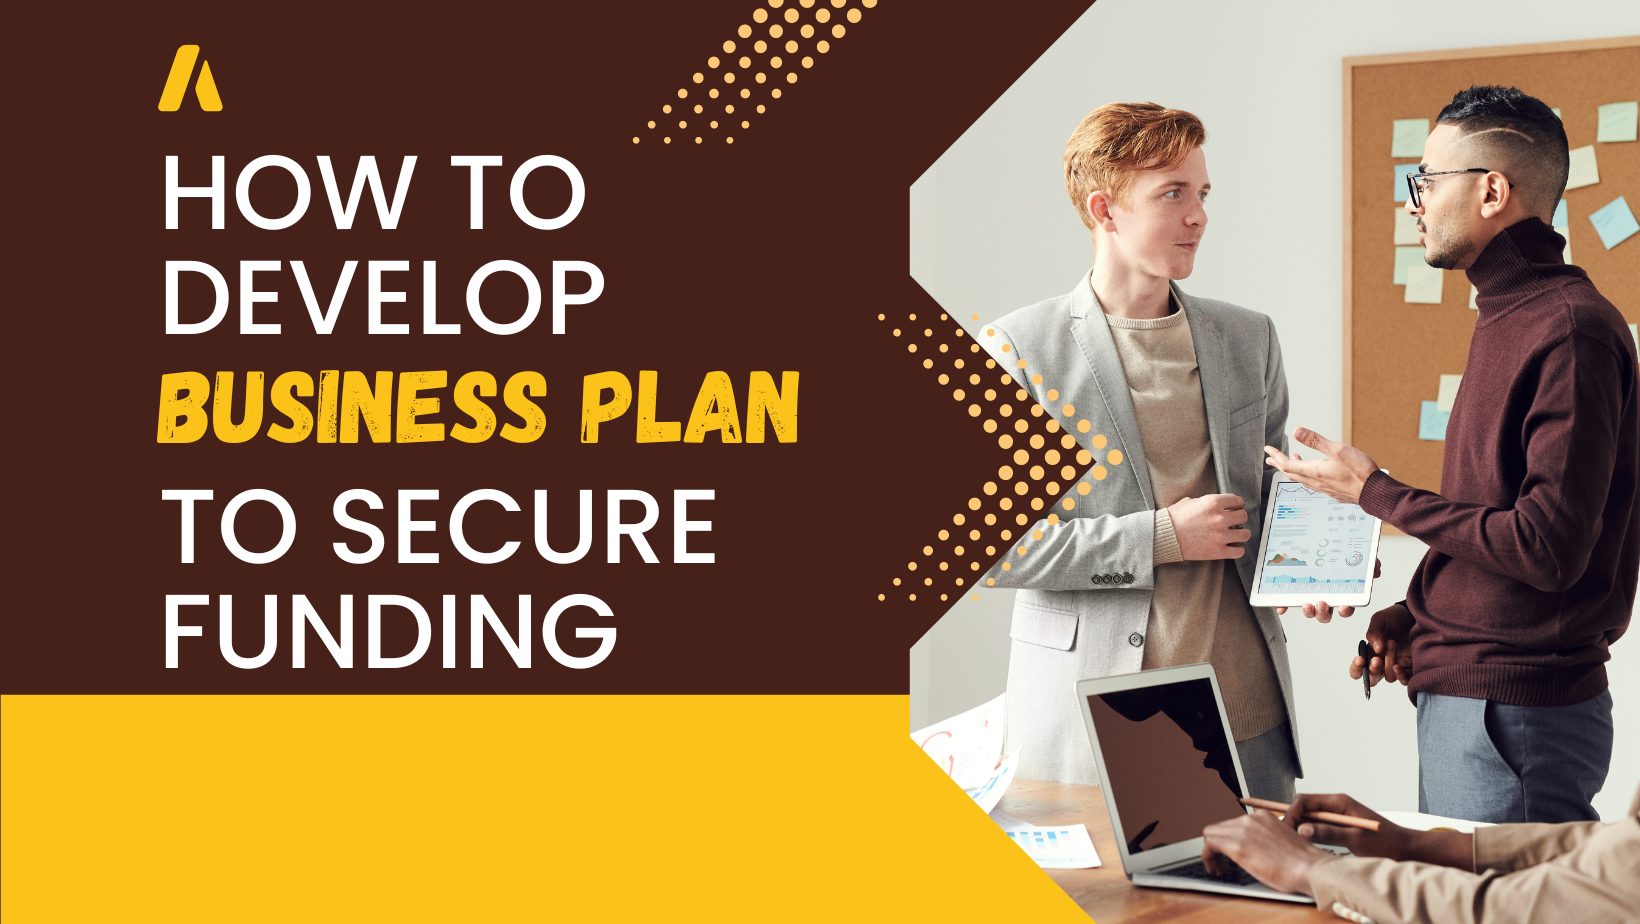 How to Develop a Business Plan to Secure Funding